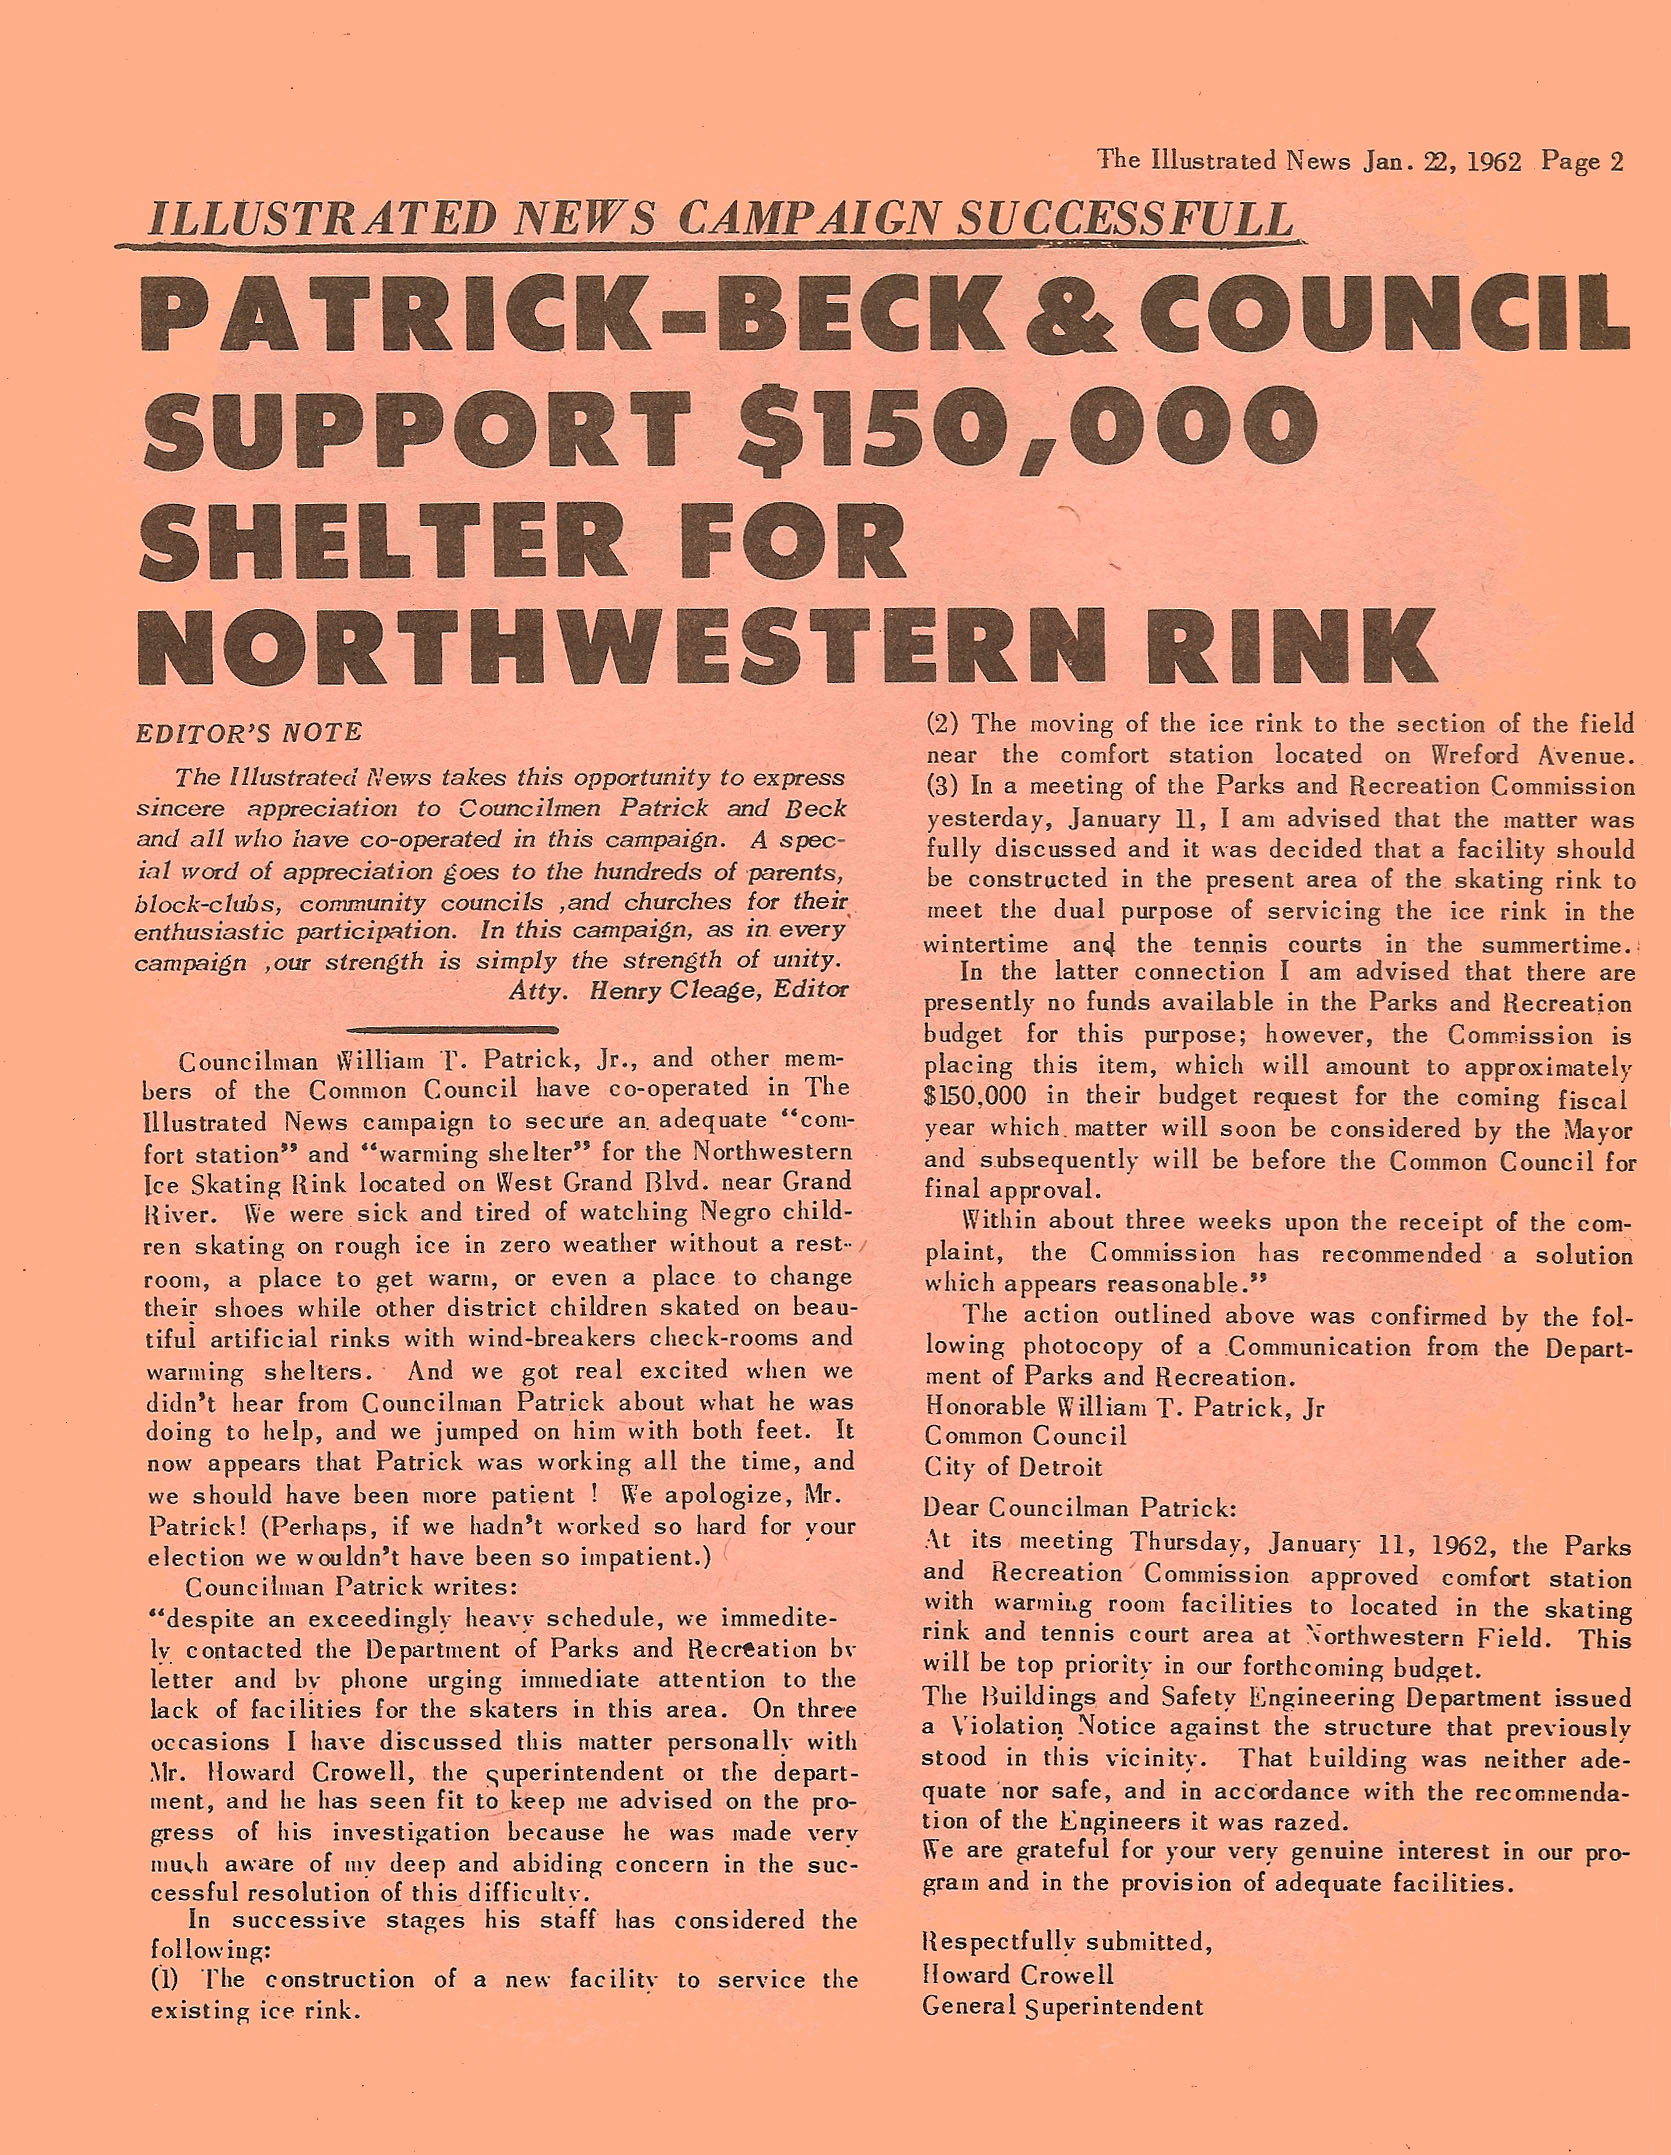 council_support_jan_22_1962